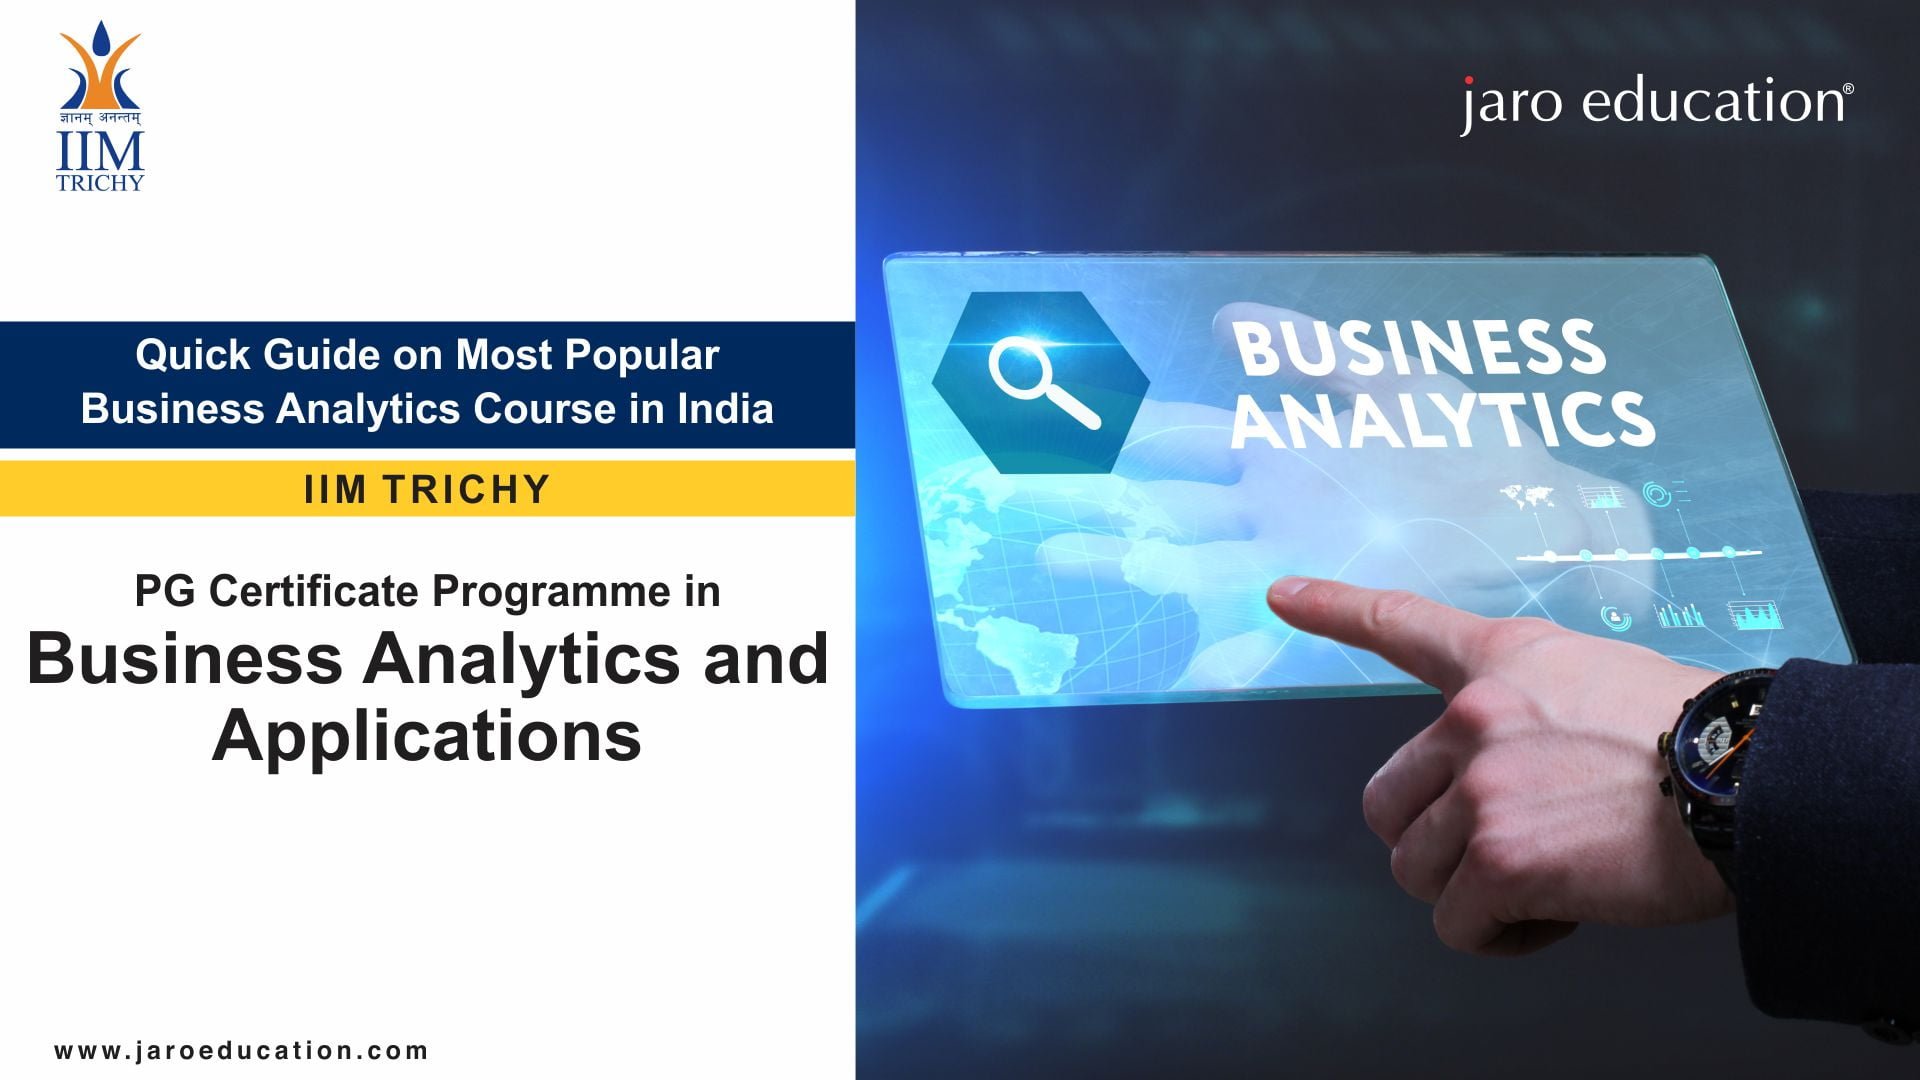 A-guide-on-Business-Analytics-in-India jaro